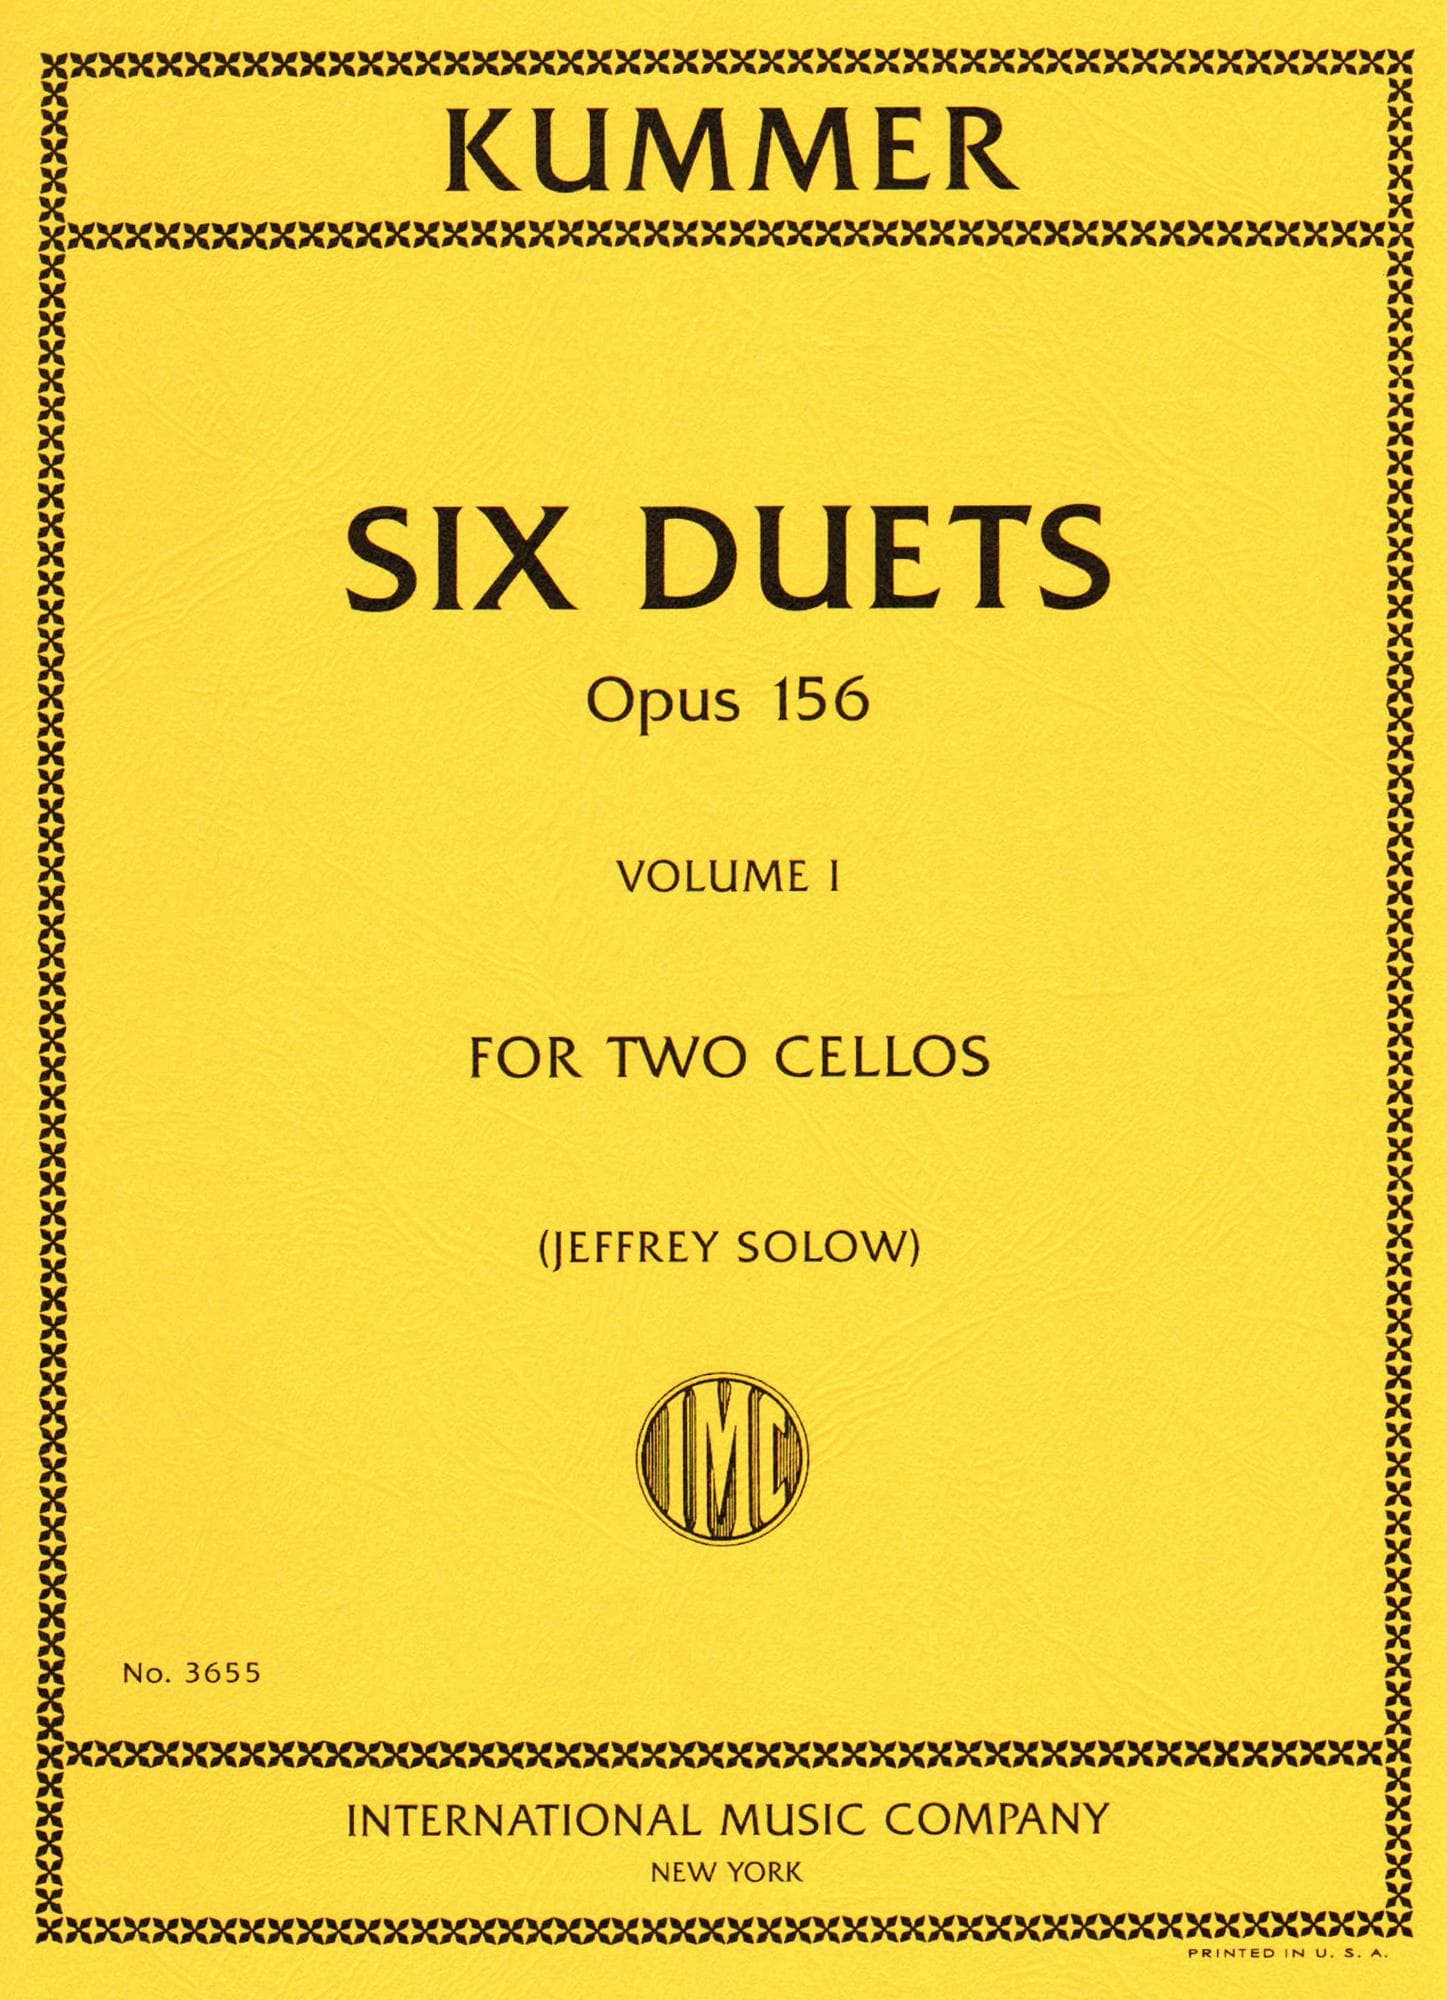 Kummer, FA - Six Duets, Op 156, Volume 1 - Two Cellos - edited by Jeffrey Solow - International Music Co